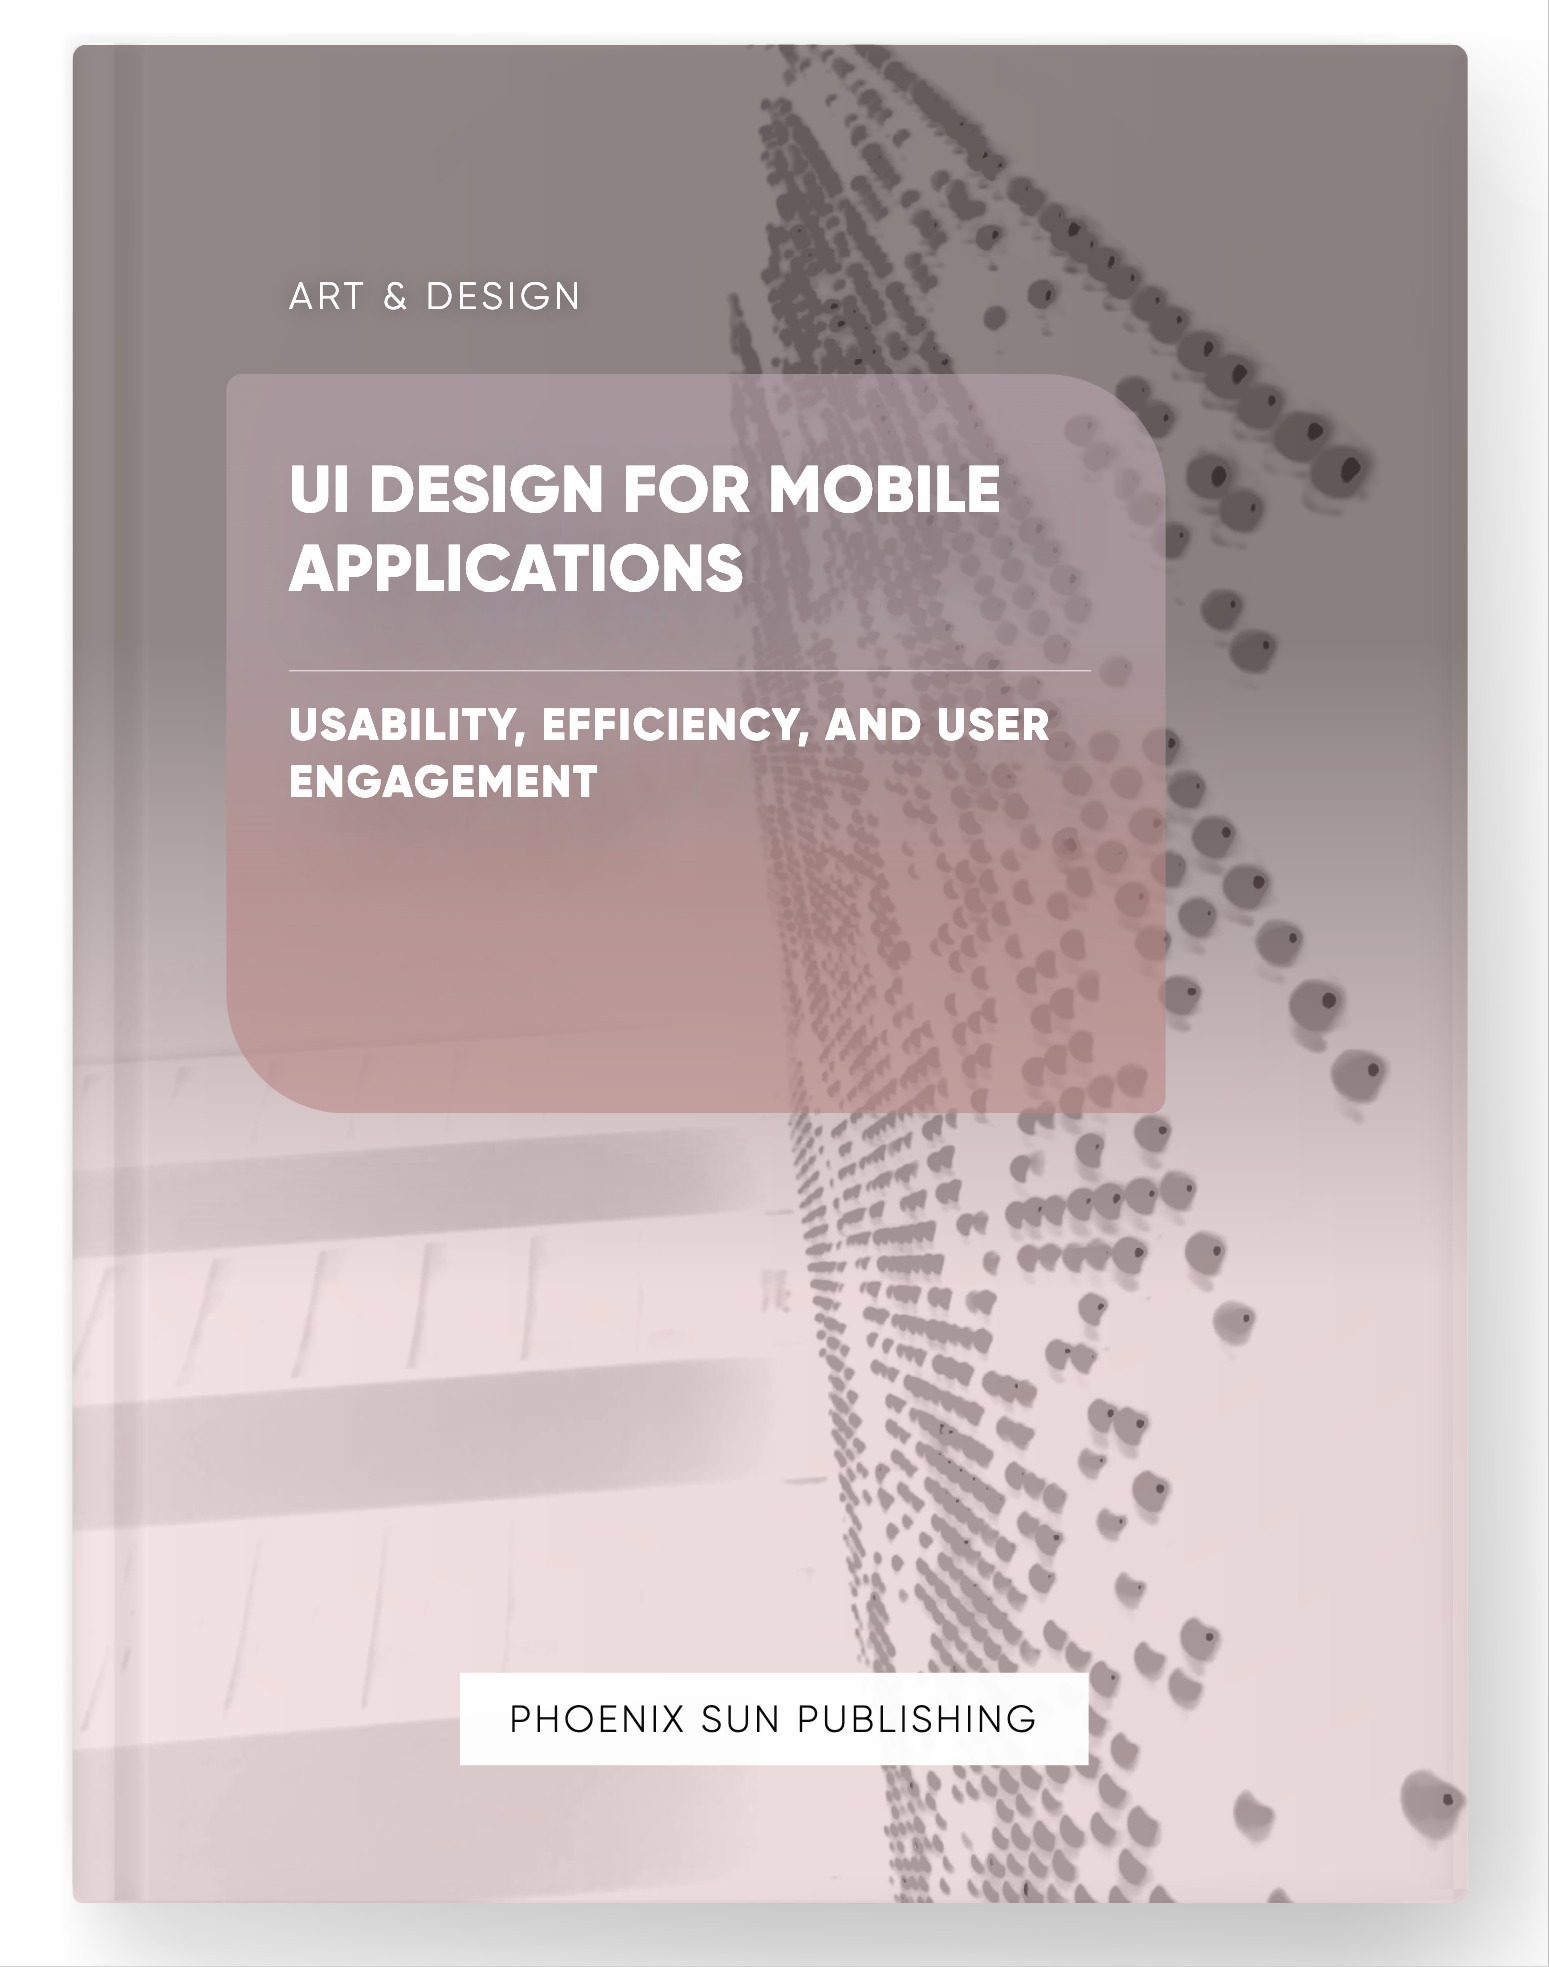 UI Design for Mobile Applications – Usability, Efficiency, and User Engagement